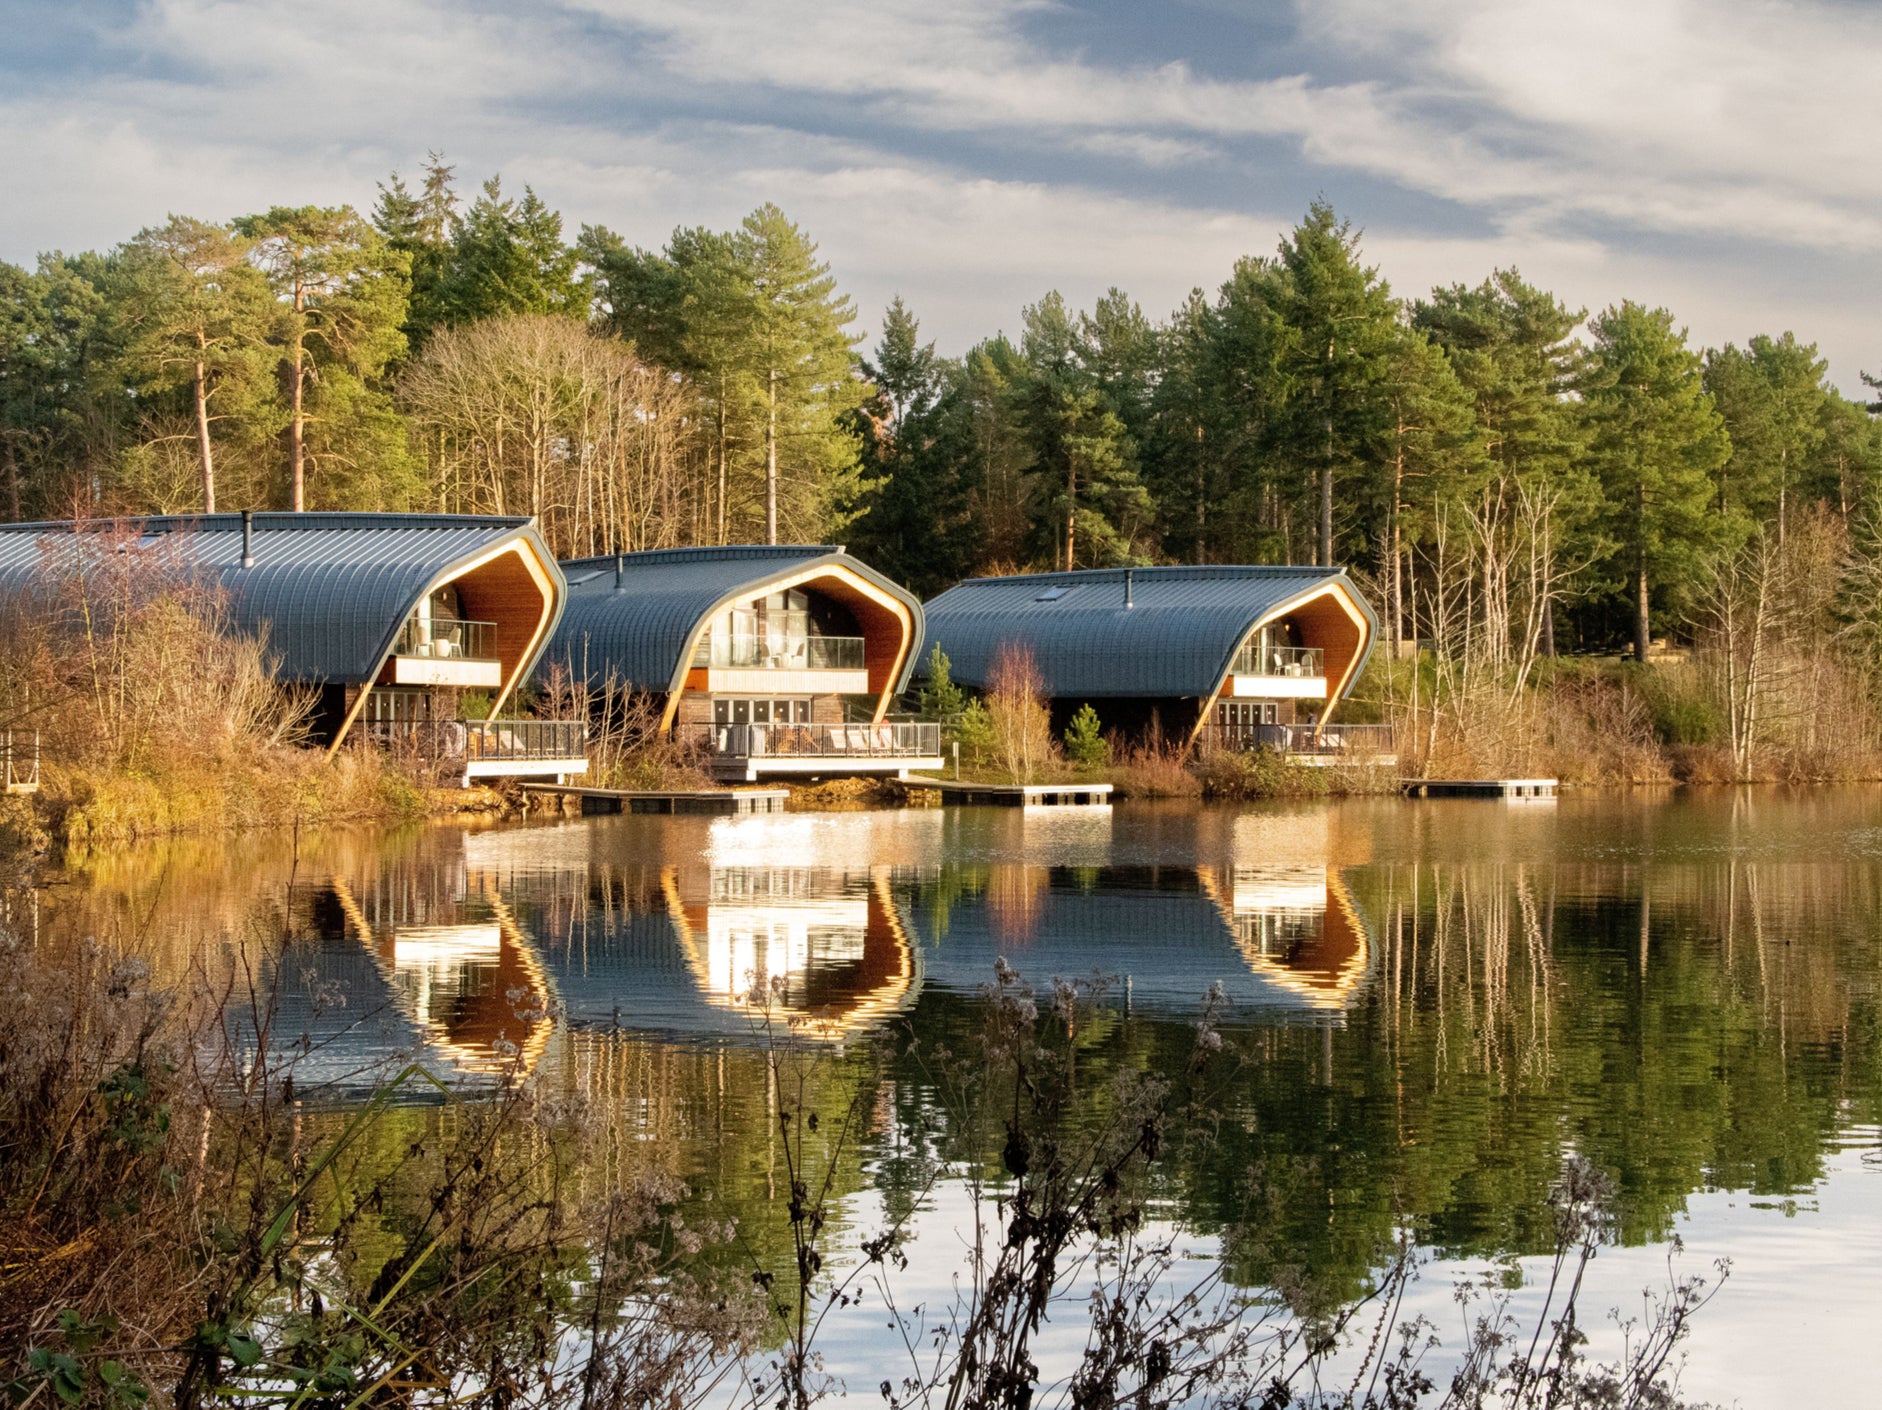 Travellers who hope over the Channel could enjoy Center Parcs with more cash in their pockets